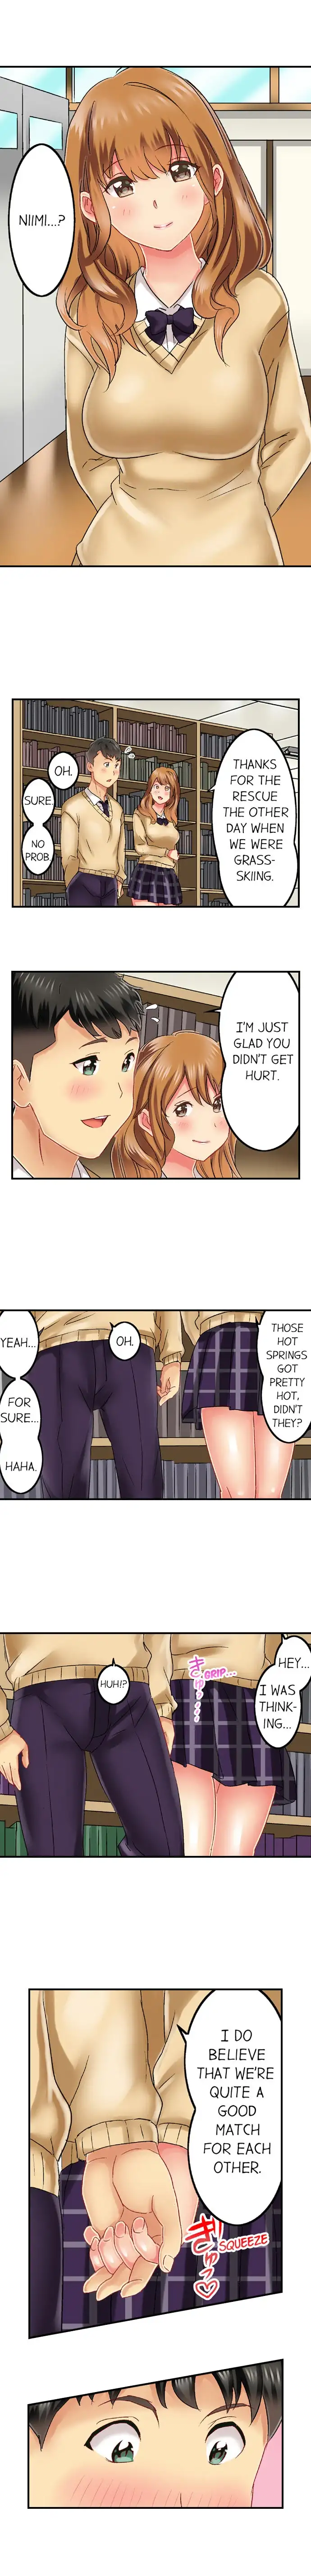 Seeing Her Panties Lets Me Stick In - Chapter 34 Page 5